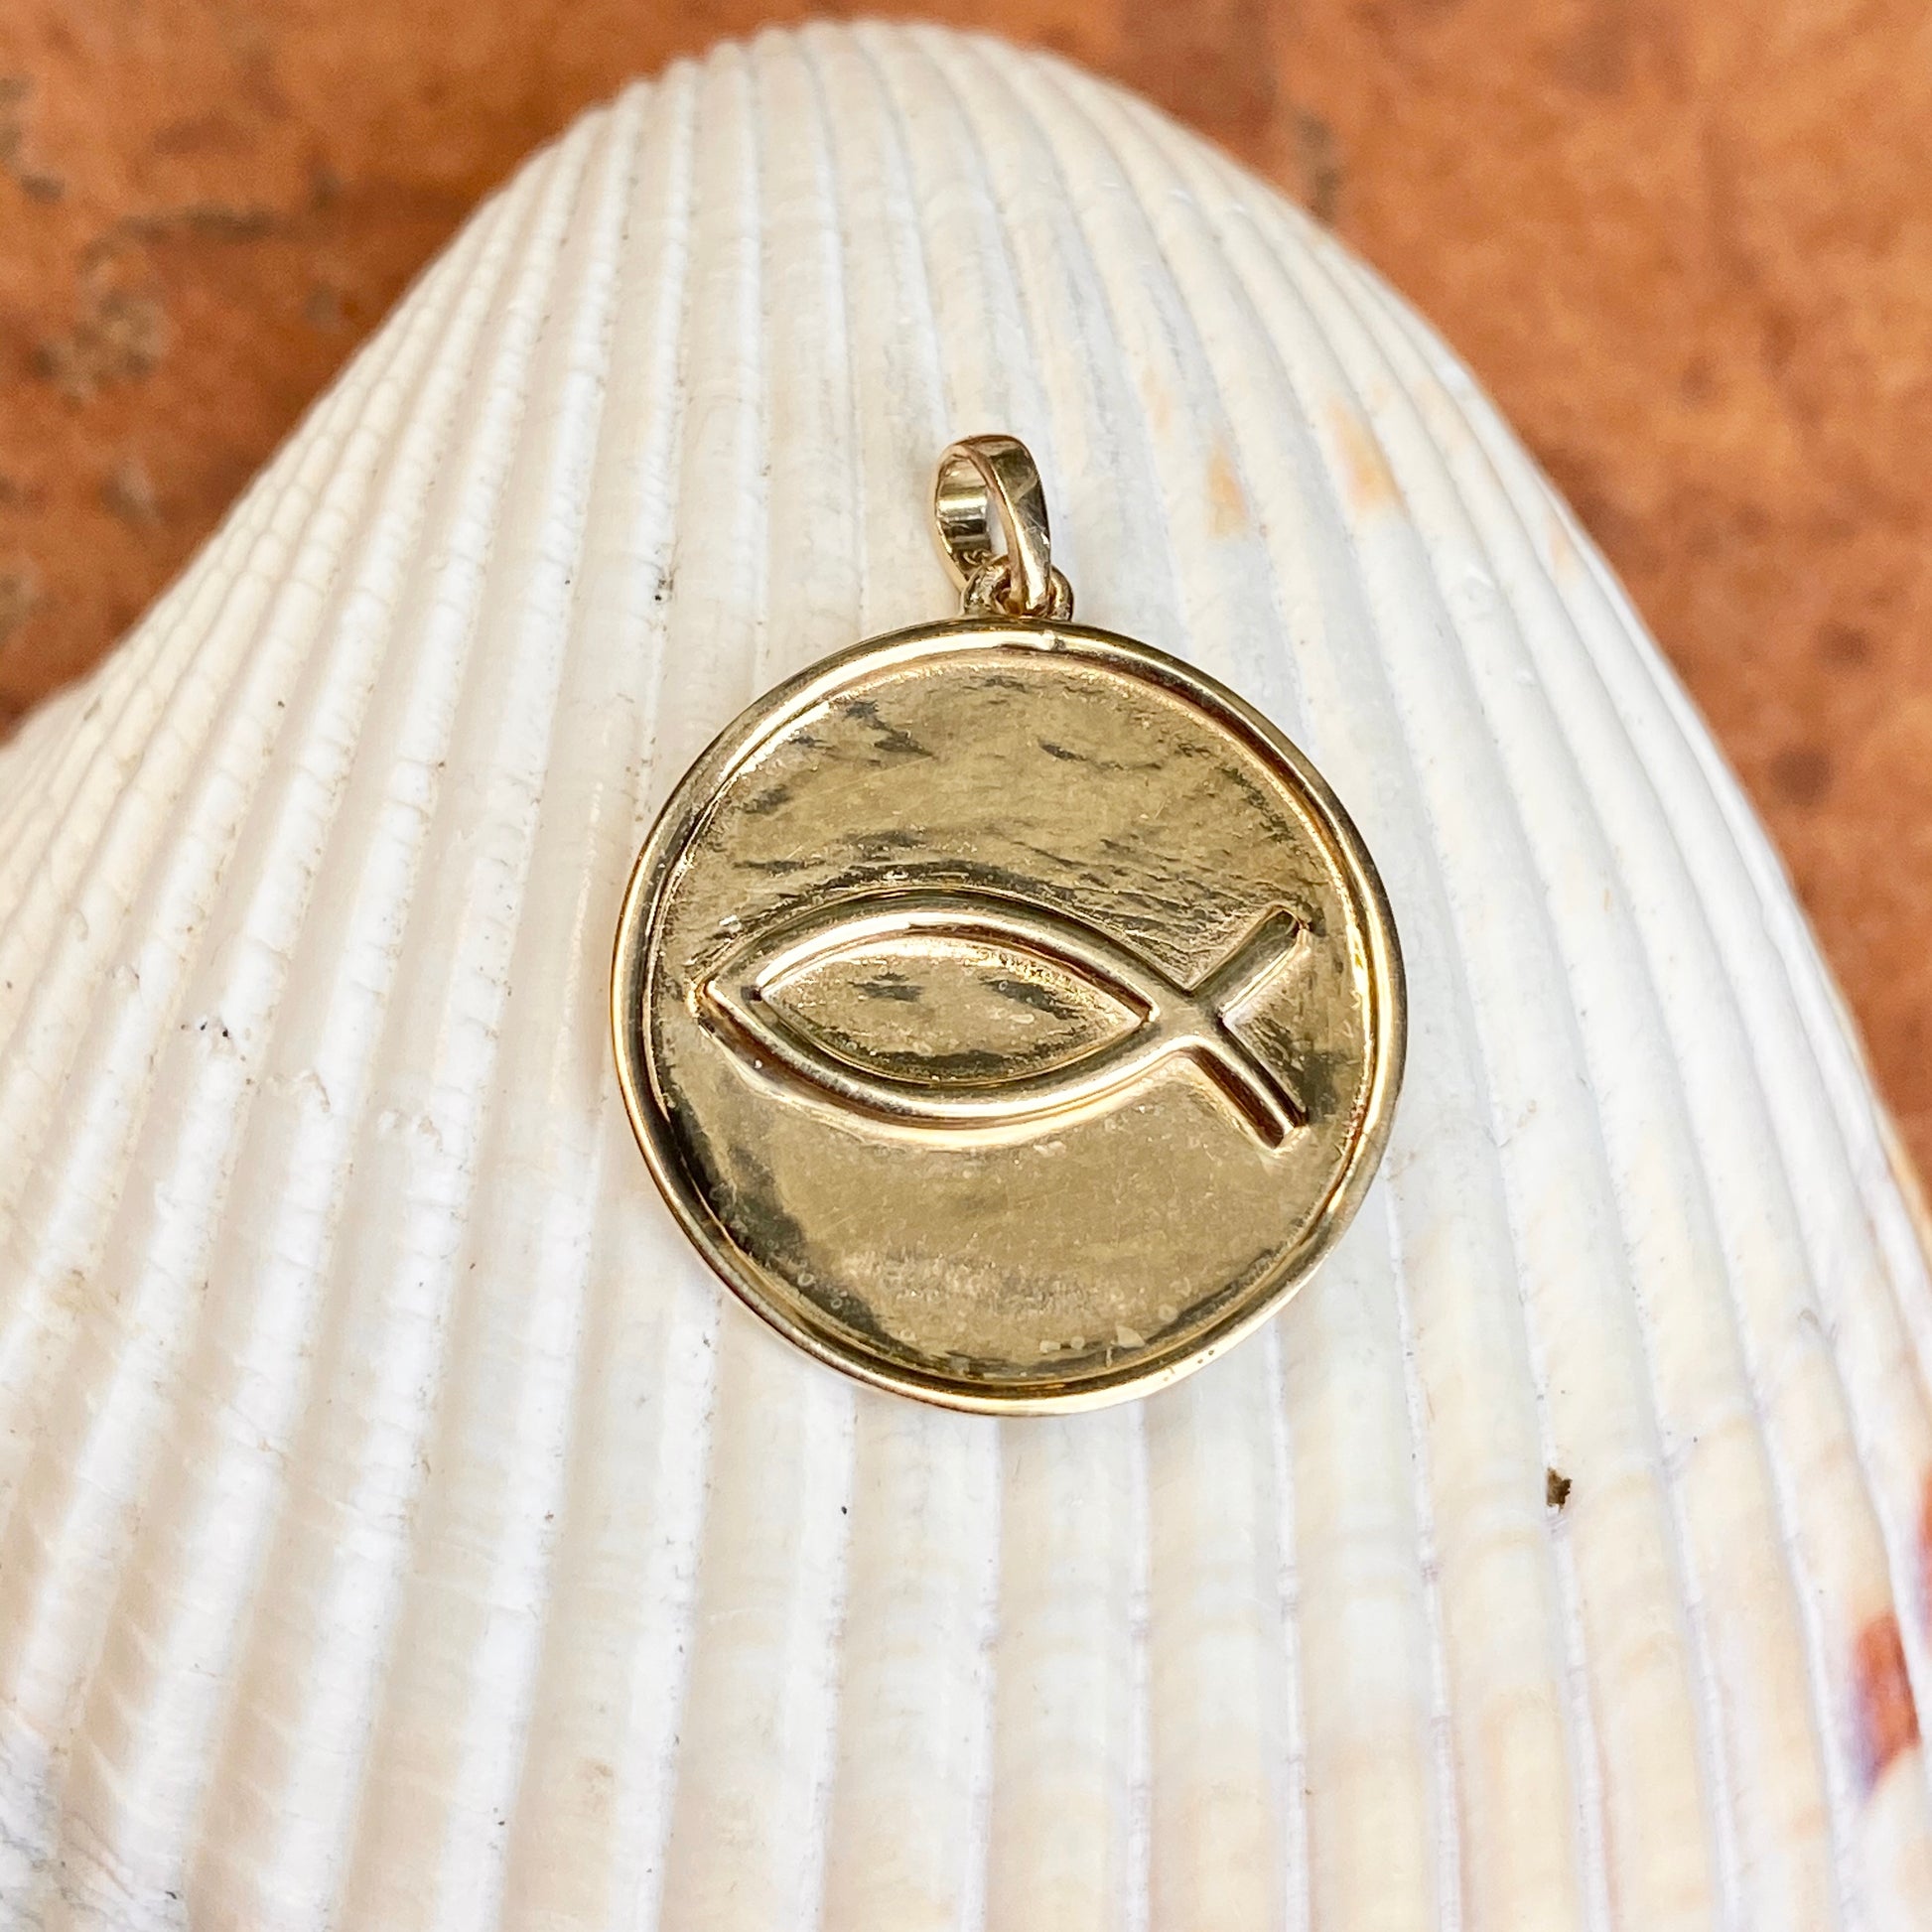 14KT Yellow Gold Matte Ichthus Round Medal Disc Pendant, 14KT Yellow Gold Matte Ichthus Round Medal Disc Pendant - Legacy Saint Jewelry